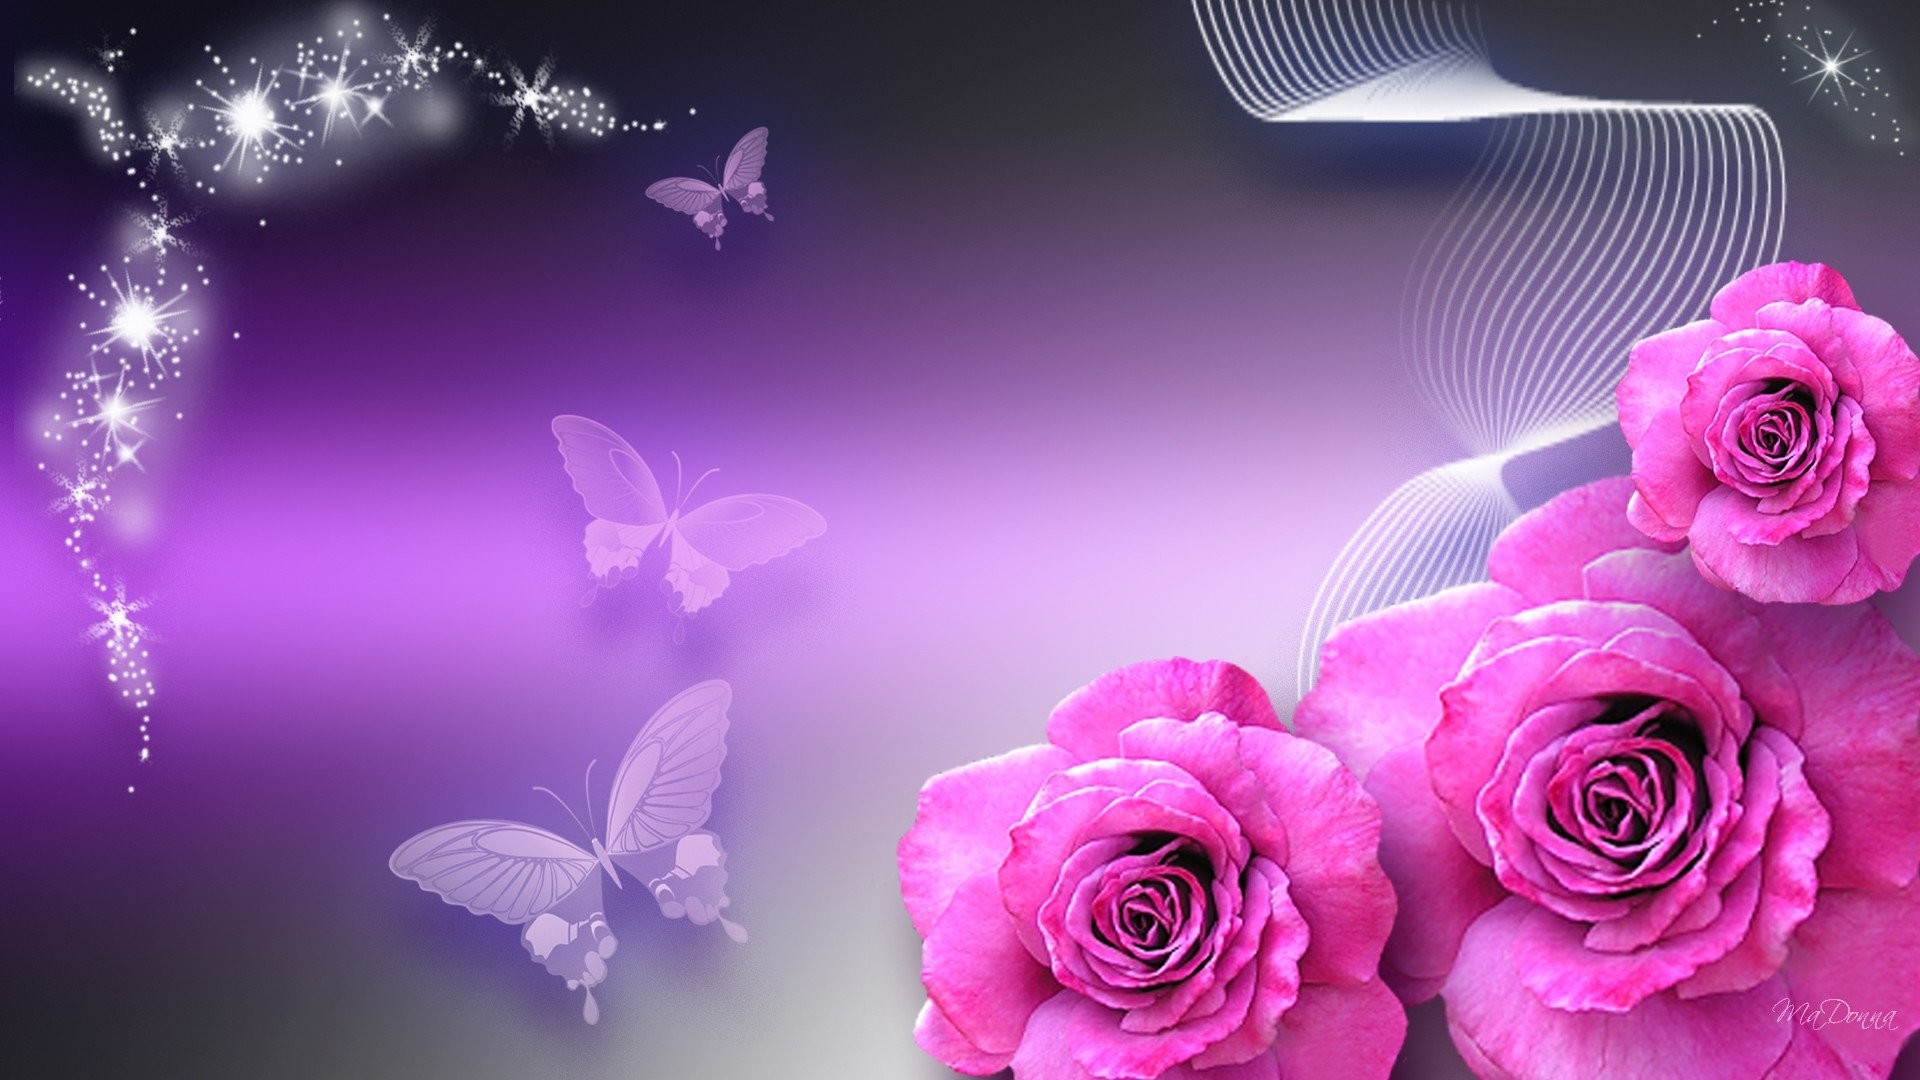 1920x1080 pictures butterfly desktop latest butterflies rose pink desktop wallpapers  high definition monitor download free amazing background photos artwork  1920Ã1080 ...